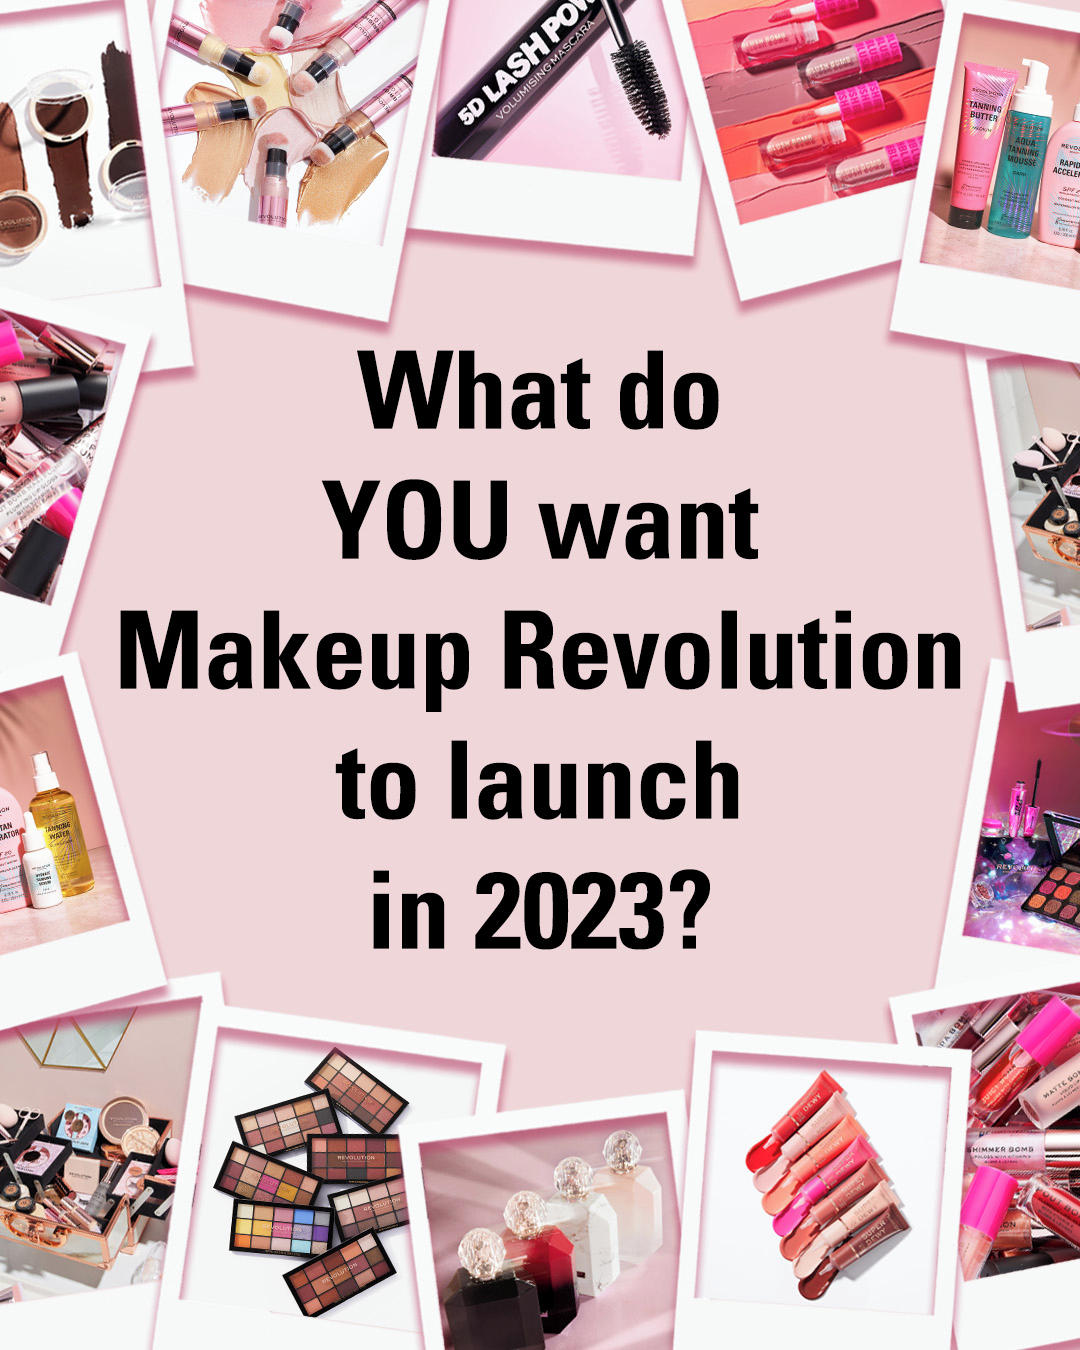 Revolution Makeup - Time for YOU to tell US